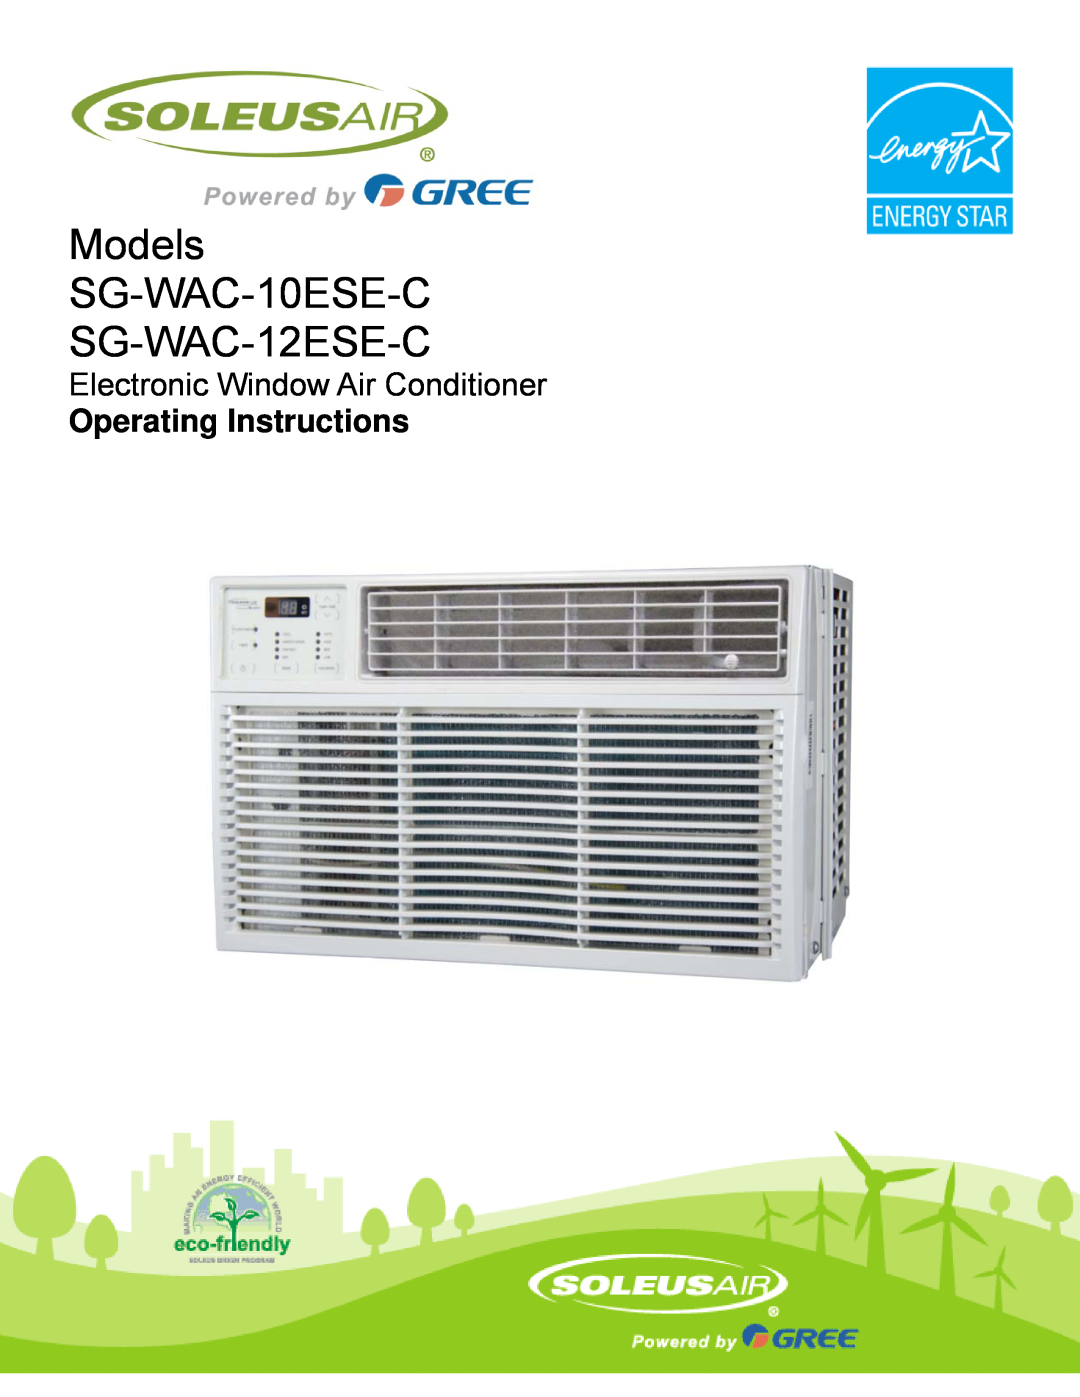 Soleus Air operating instructions Models SG-WAC-10ESE-C SG-WAC-12ESE-C, Electronic Window Air Conditioner, V.12101 